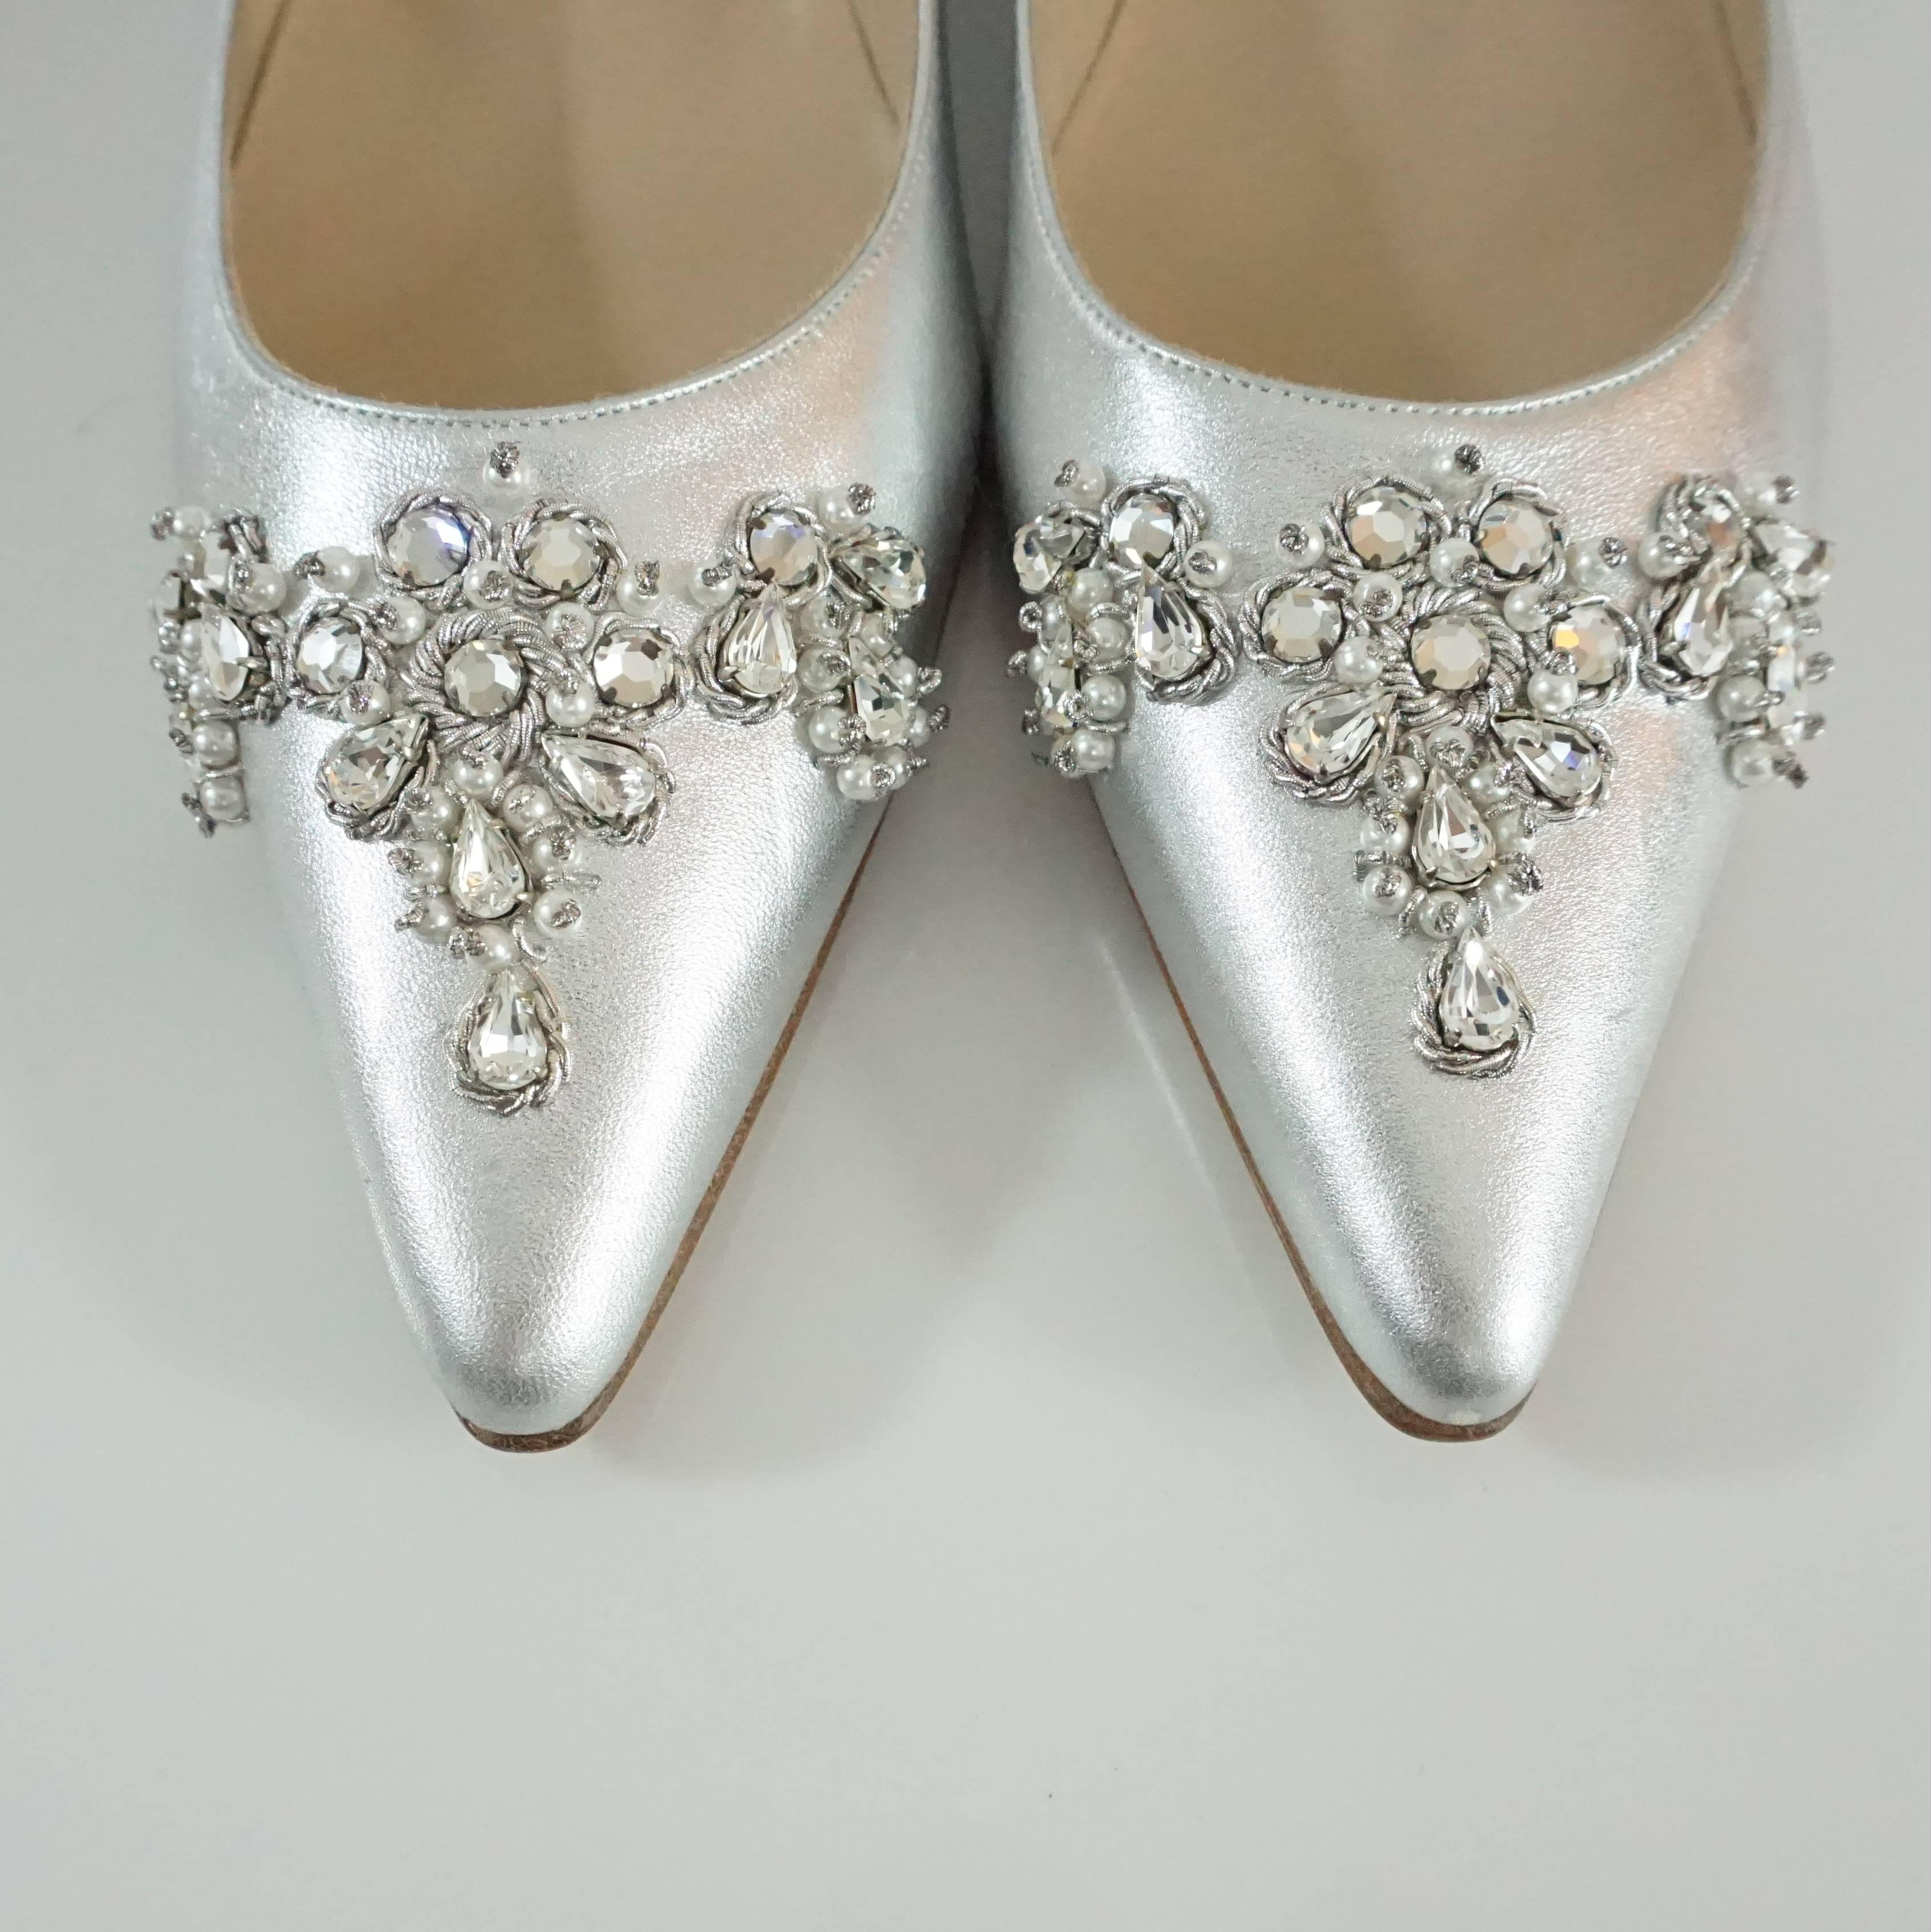 Manolo Blahnik Silver Leather Flats with Rhinestone and Pearl Detail - 40 1